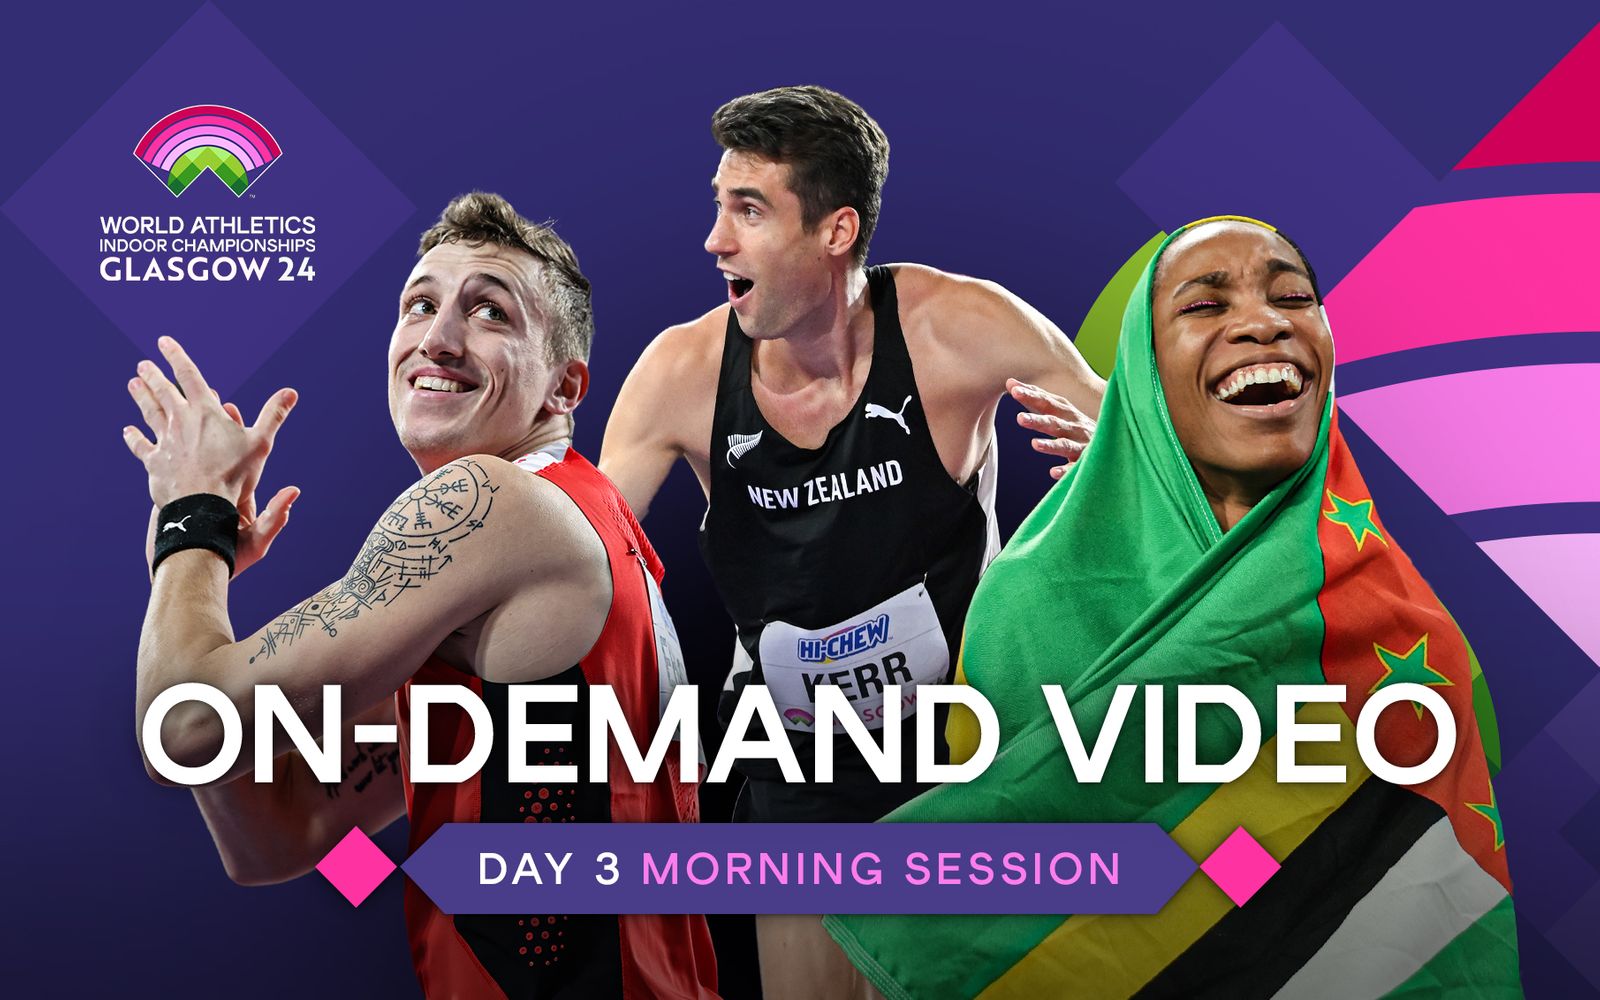 WIC Glasgow livestream - Day 3 morning session